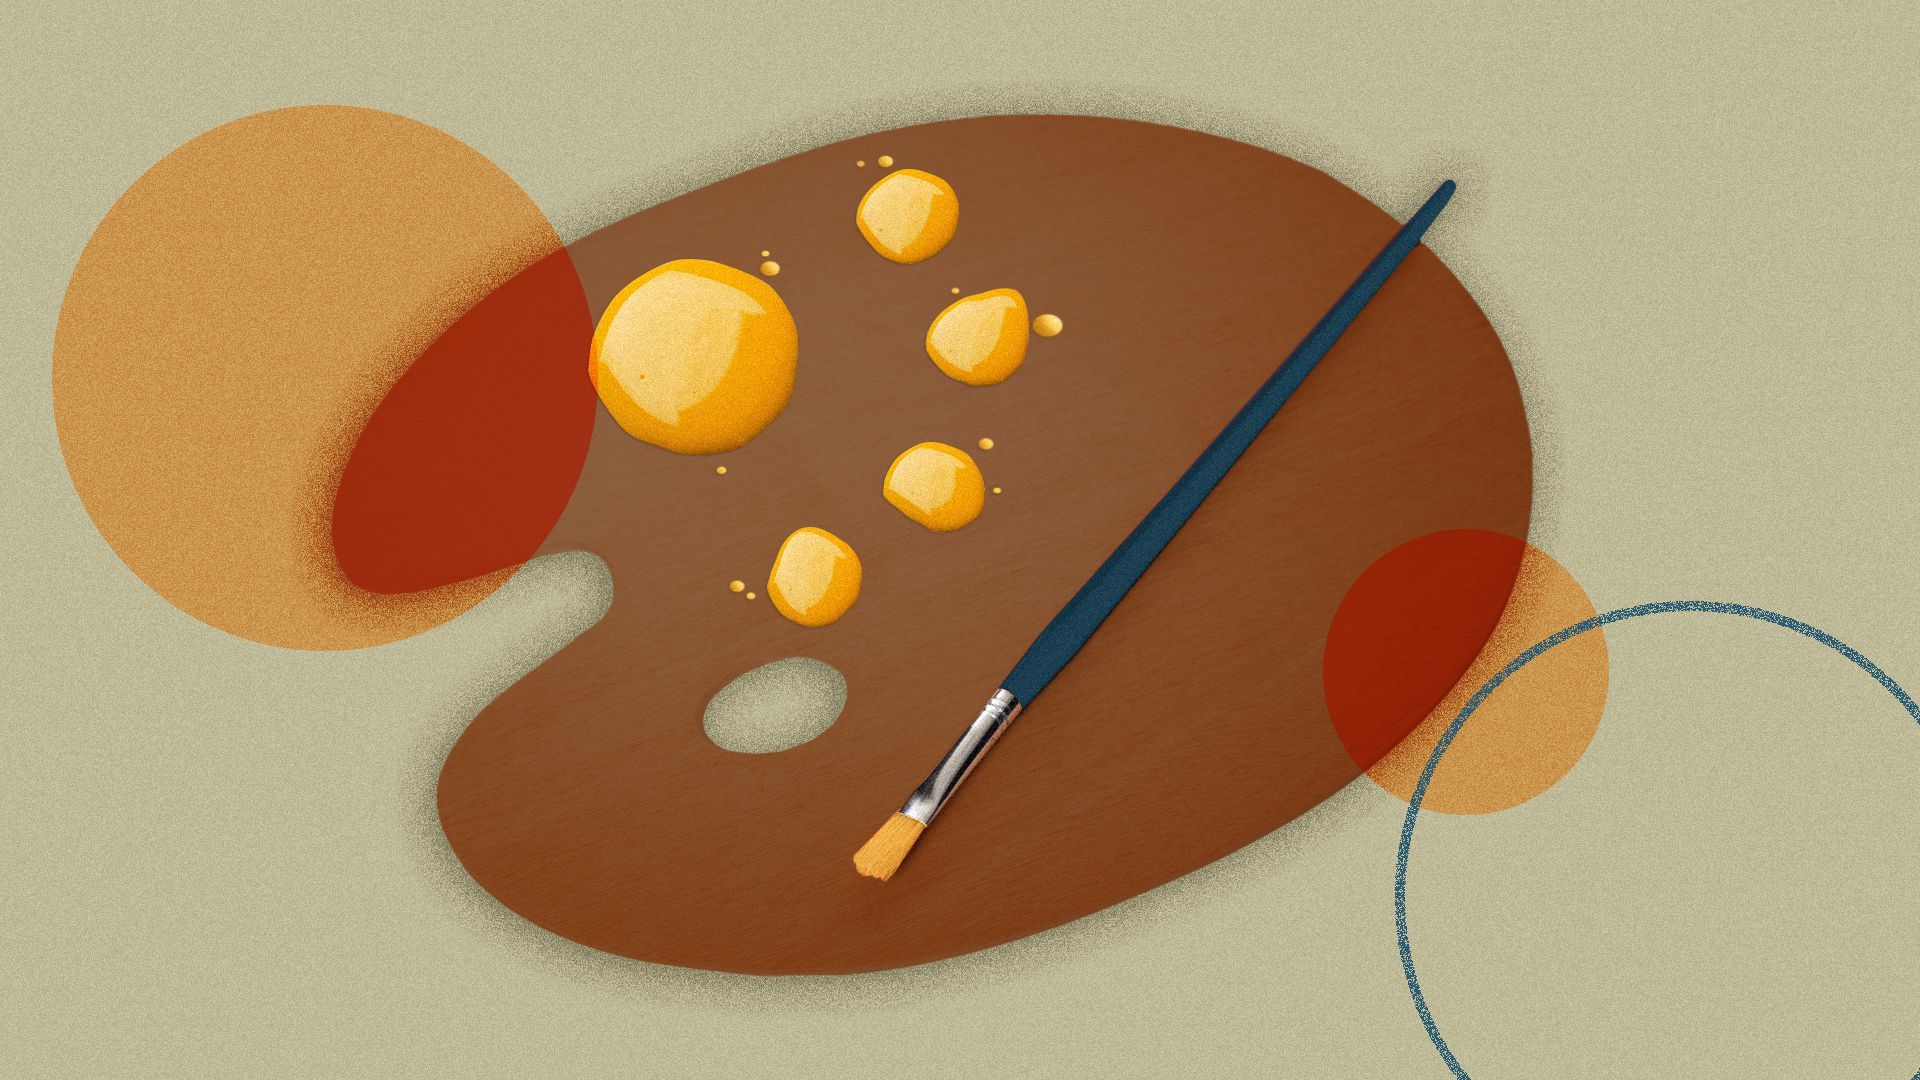 Illustration of a painter's palette with yellow paint blobs mimicking the shape of the stars on the Chinese flag.